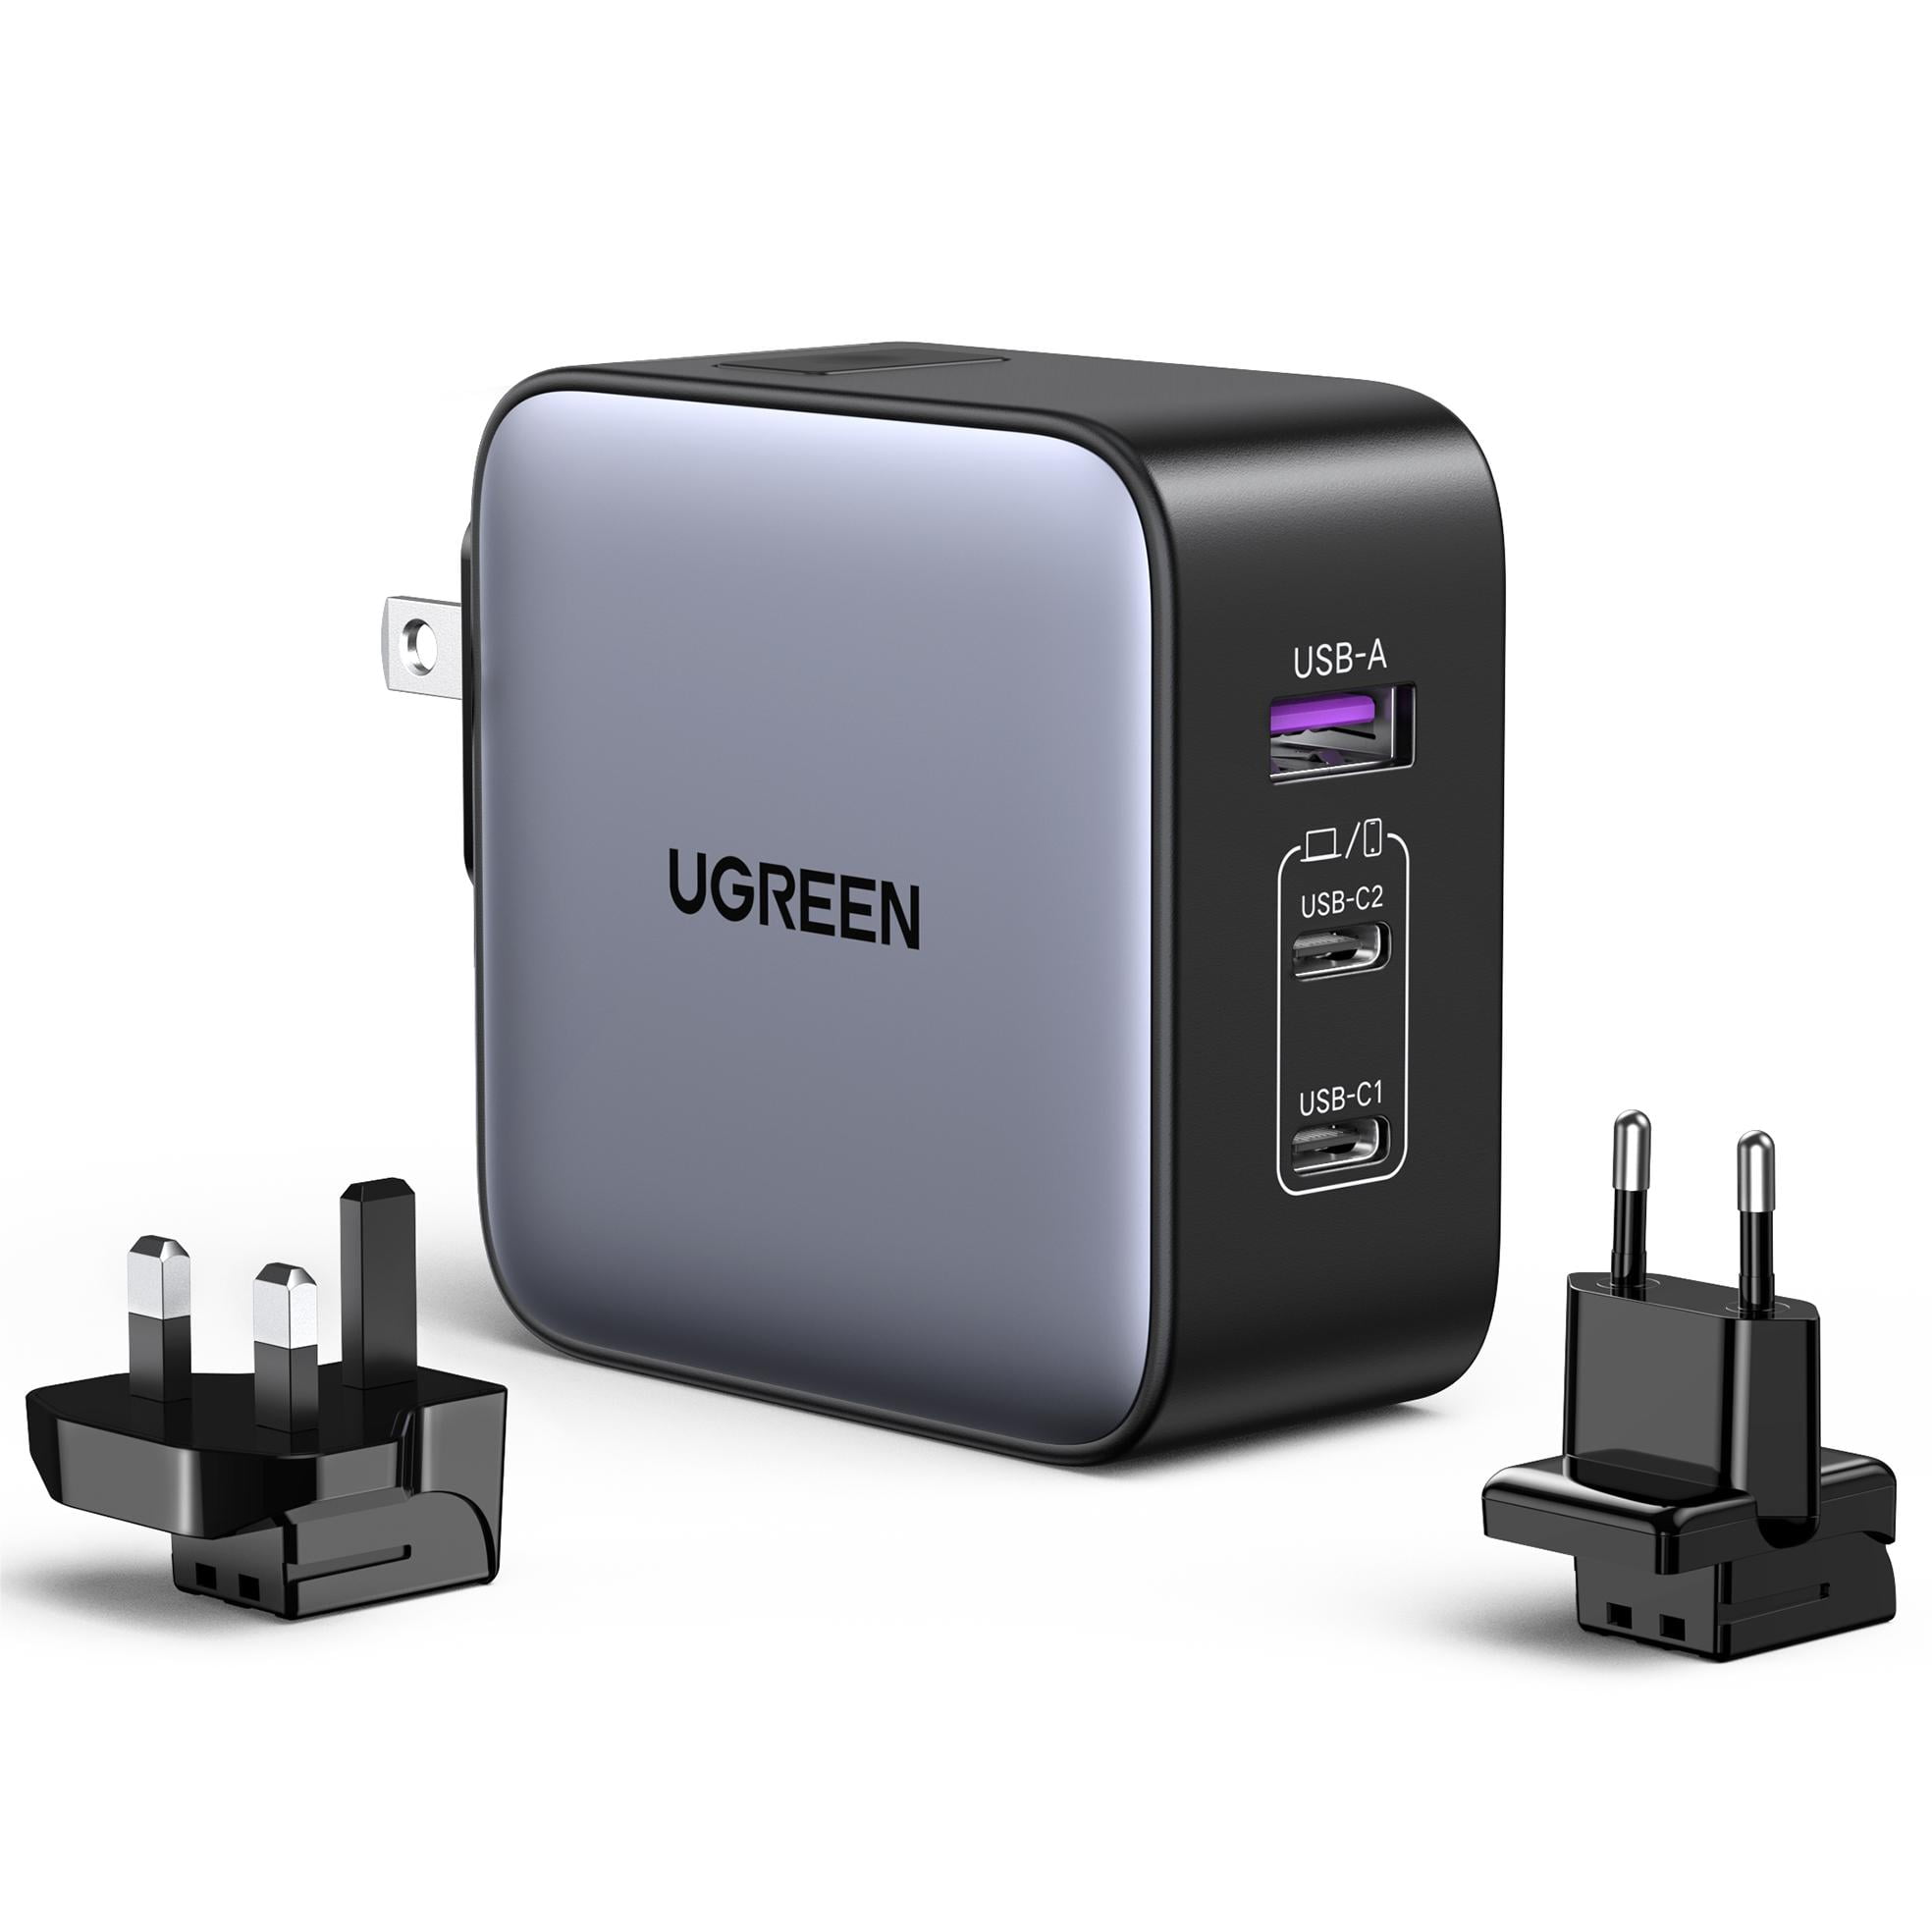 UGREEN 65W Chargeur USB C Rapide 3 Ports+60W USB C Cable